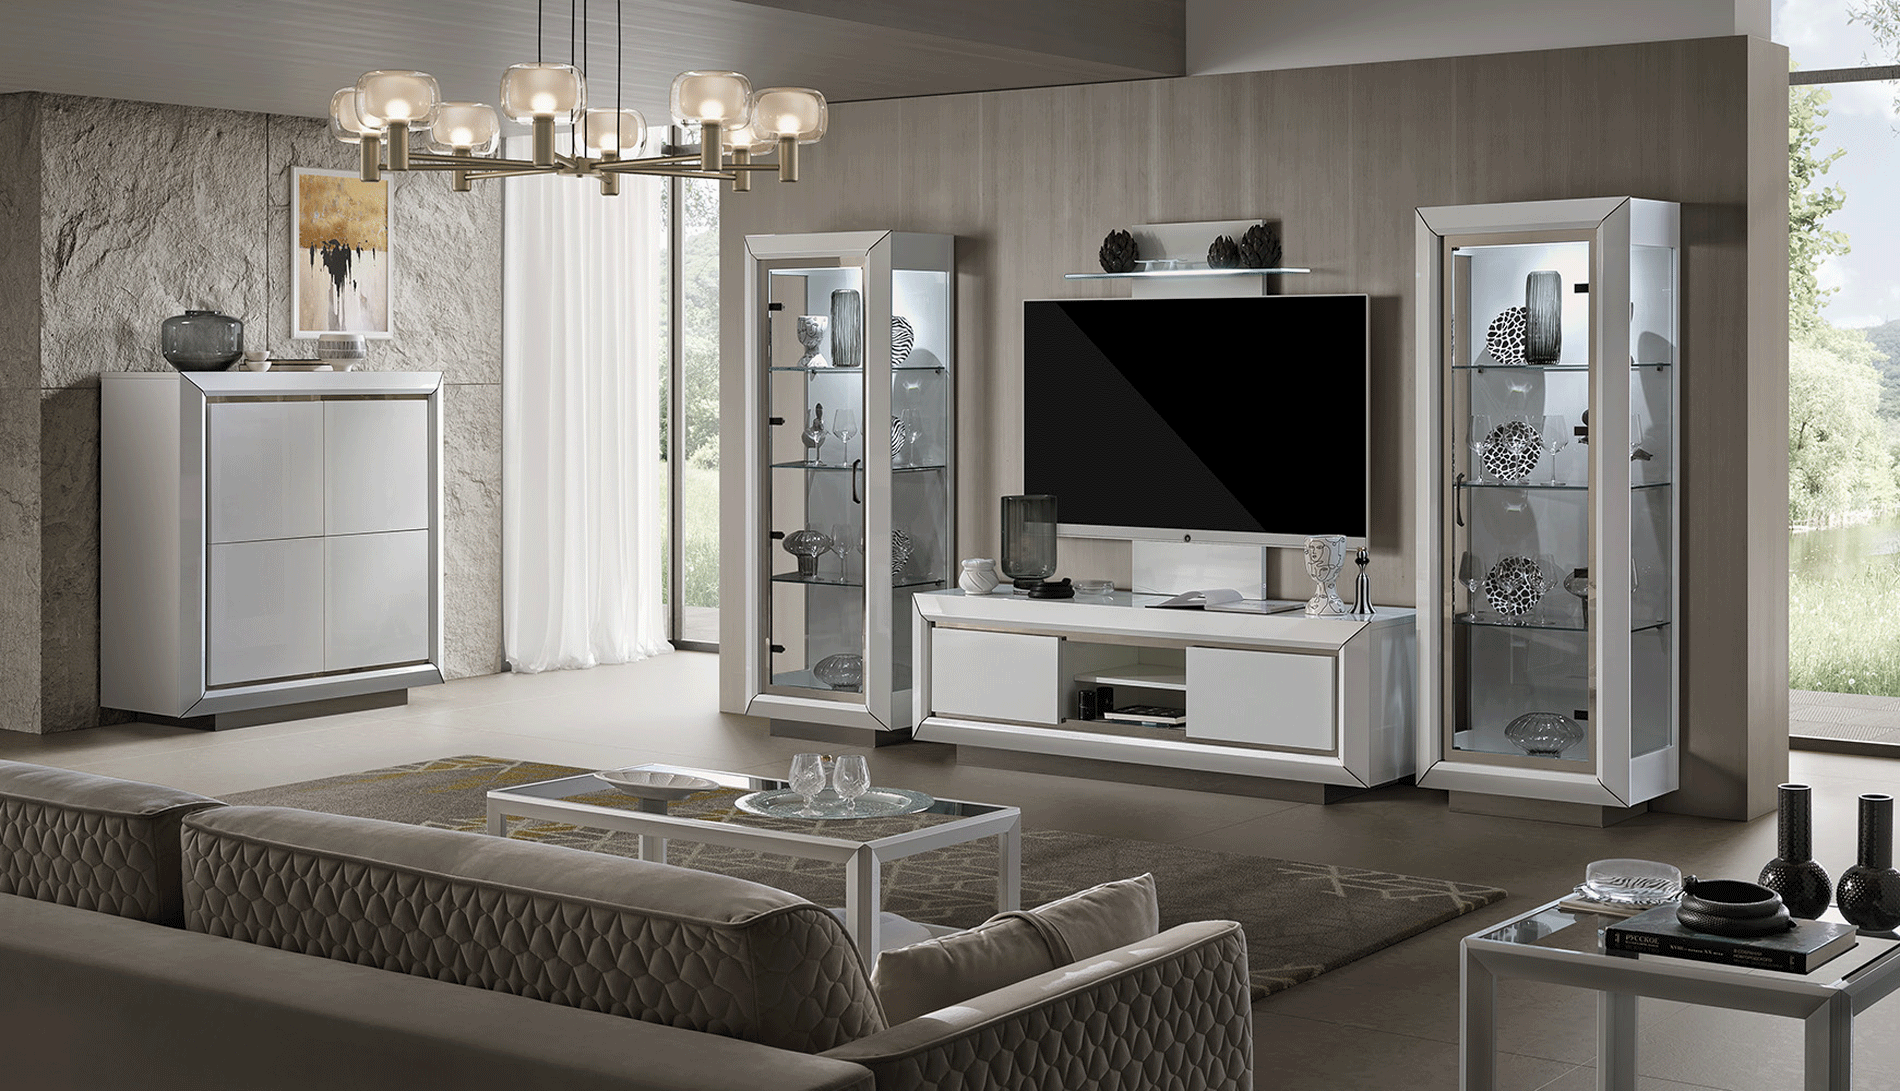 Wallunits Hallway Console tables and Mirrors Elite WHITE Entertainment center Additional items